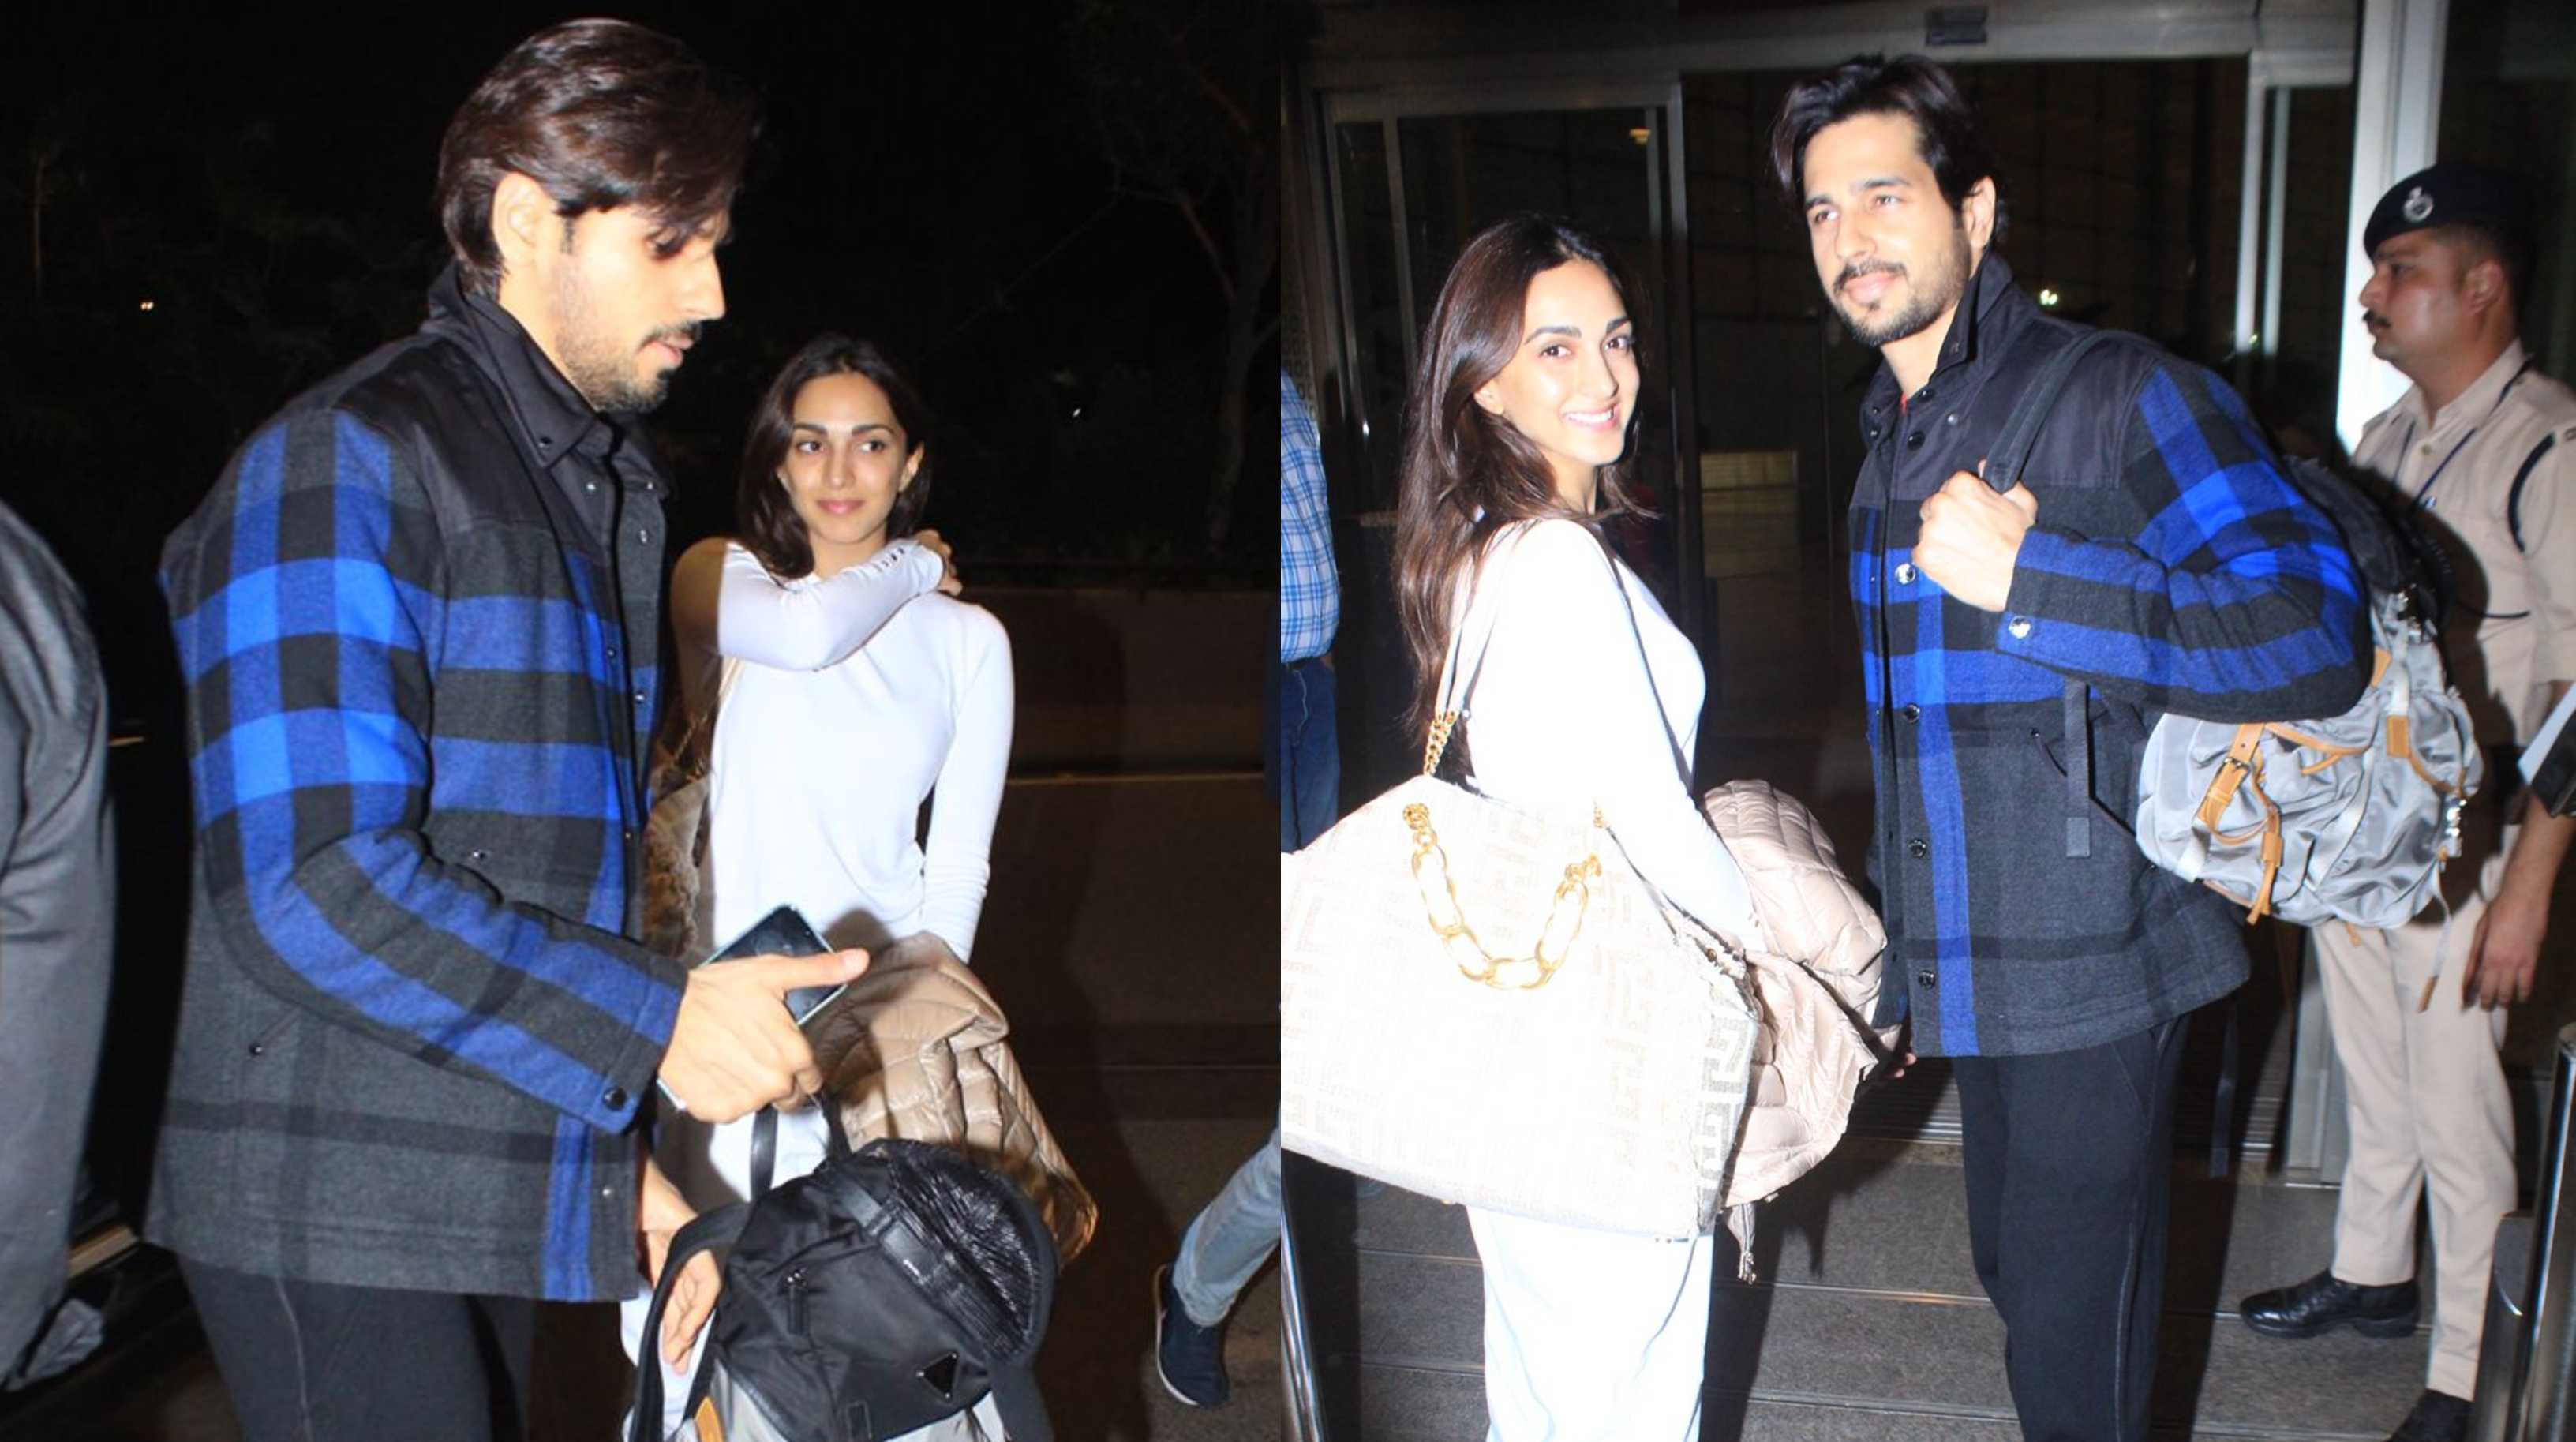 ‘Itni raat ko..’: Sidharth Malhotra and Kiara Advani jet off for first New Year after wedding, leave fans intrigued